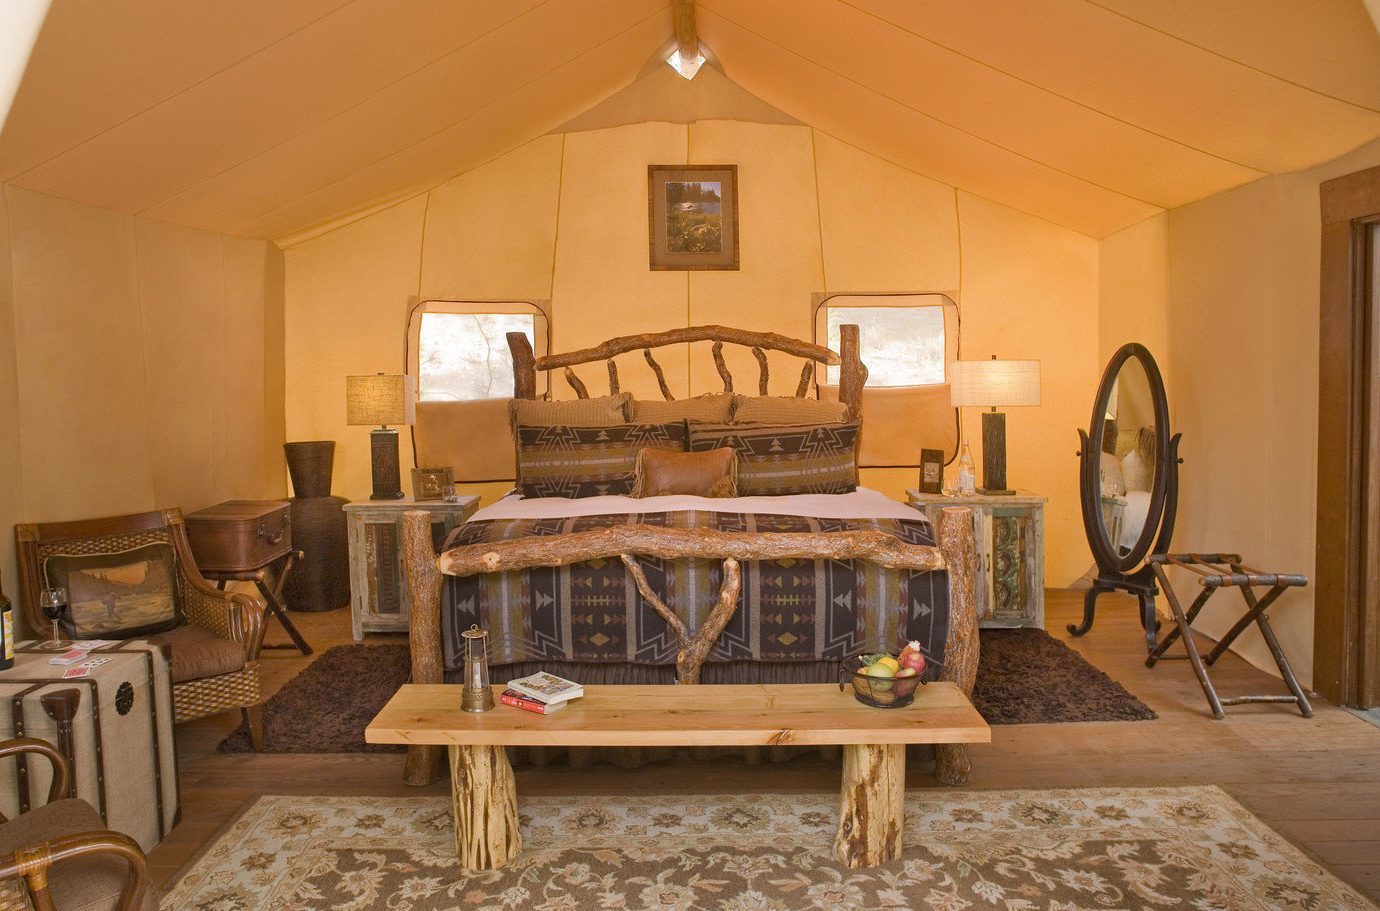 Bedroom Glamping Luxury Nature Outdoors Outdoors + Adventure remote Road Trips Rustic tent tents Trip Ideas Weekend Getaways wilderness wall indoor floor ceiling room property Living living room estate home furniture cottage interior design wooden dining room Villa farmhouse mansion wood real estate Suite area